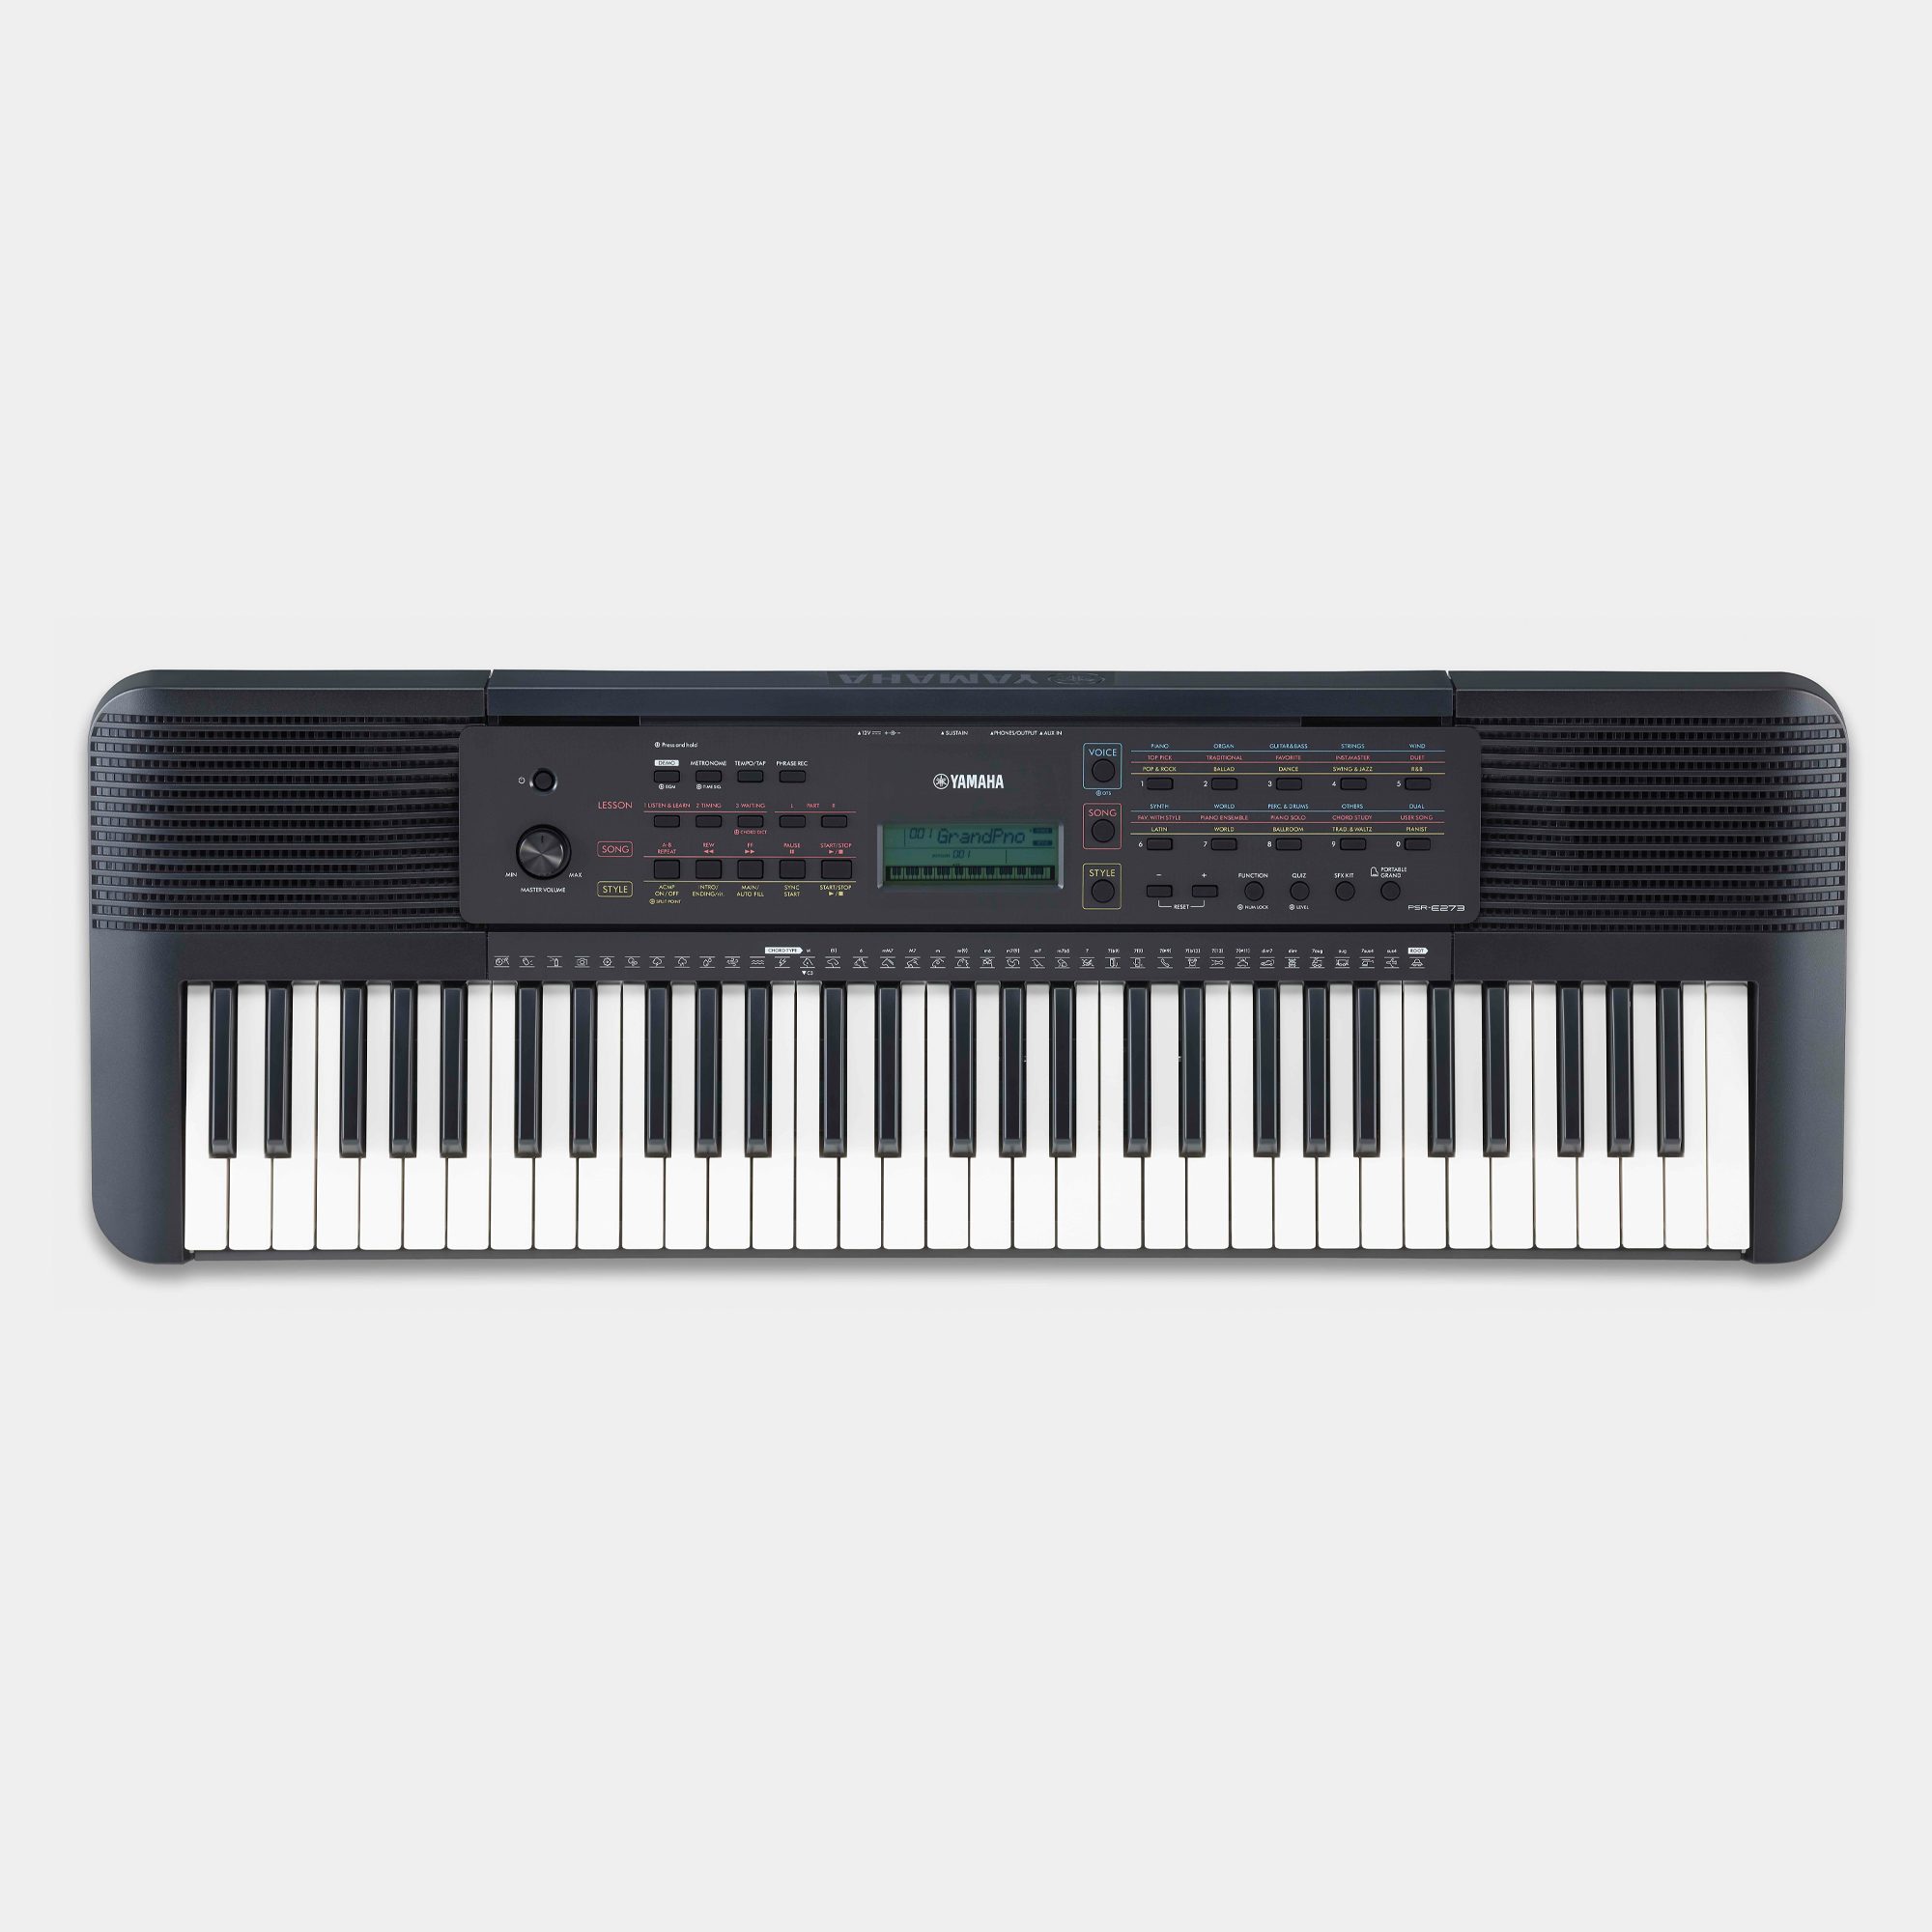 Portable Keyboards - Keyboard Instruments - Musical Instruments 